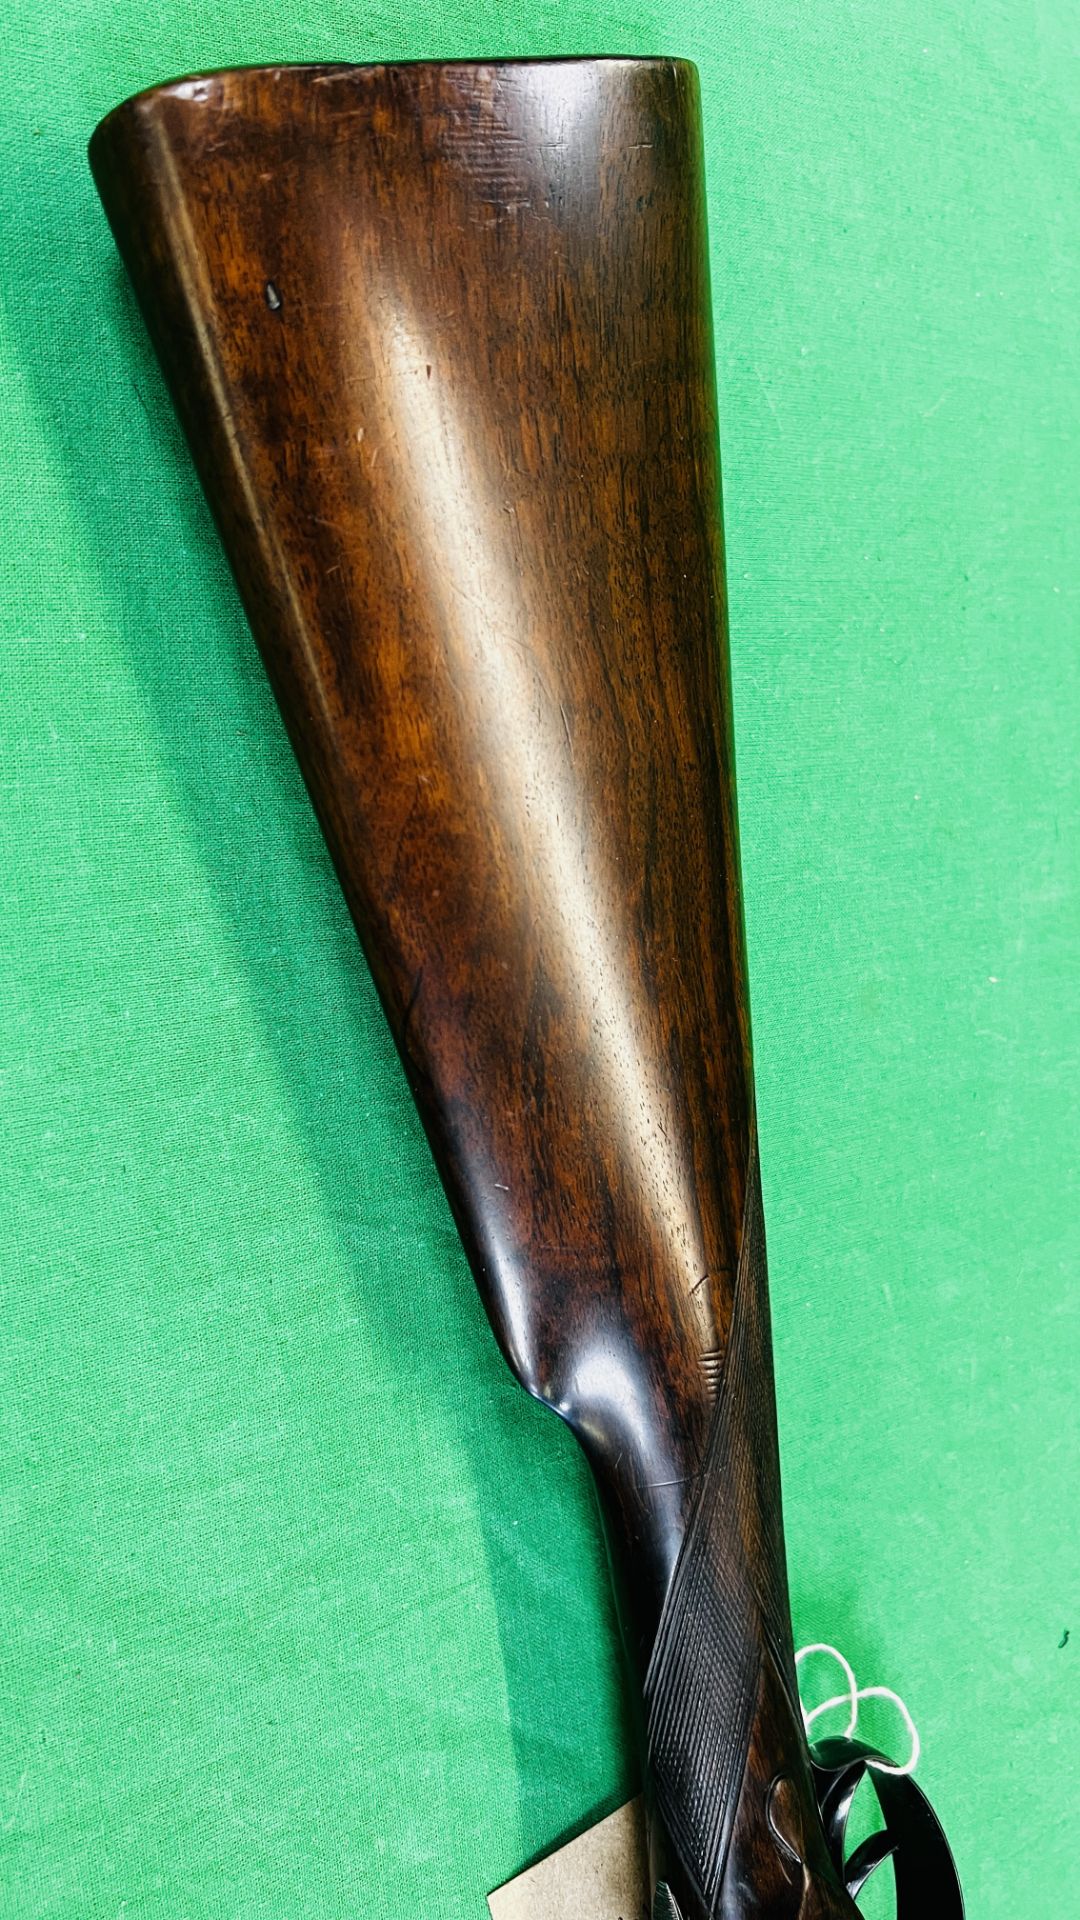 12 BORE TOLLEY SIDE BY SIDE SHOTGUN #8670, 28" BARRELS (2 3/4" CHAMBER), EJECTOR, - Image 13 of 37